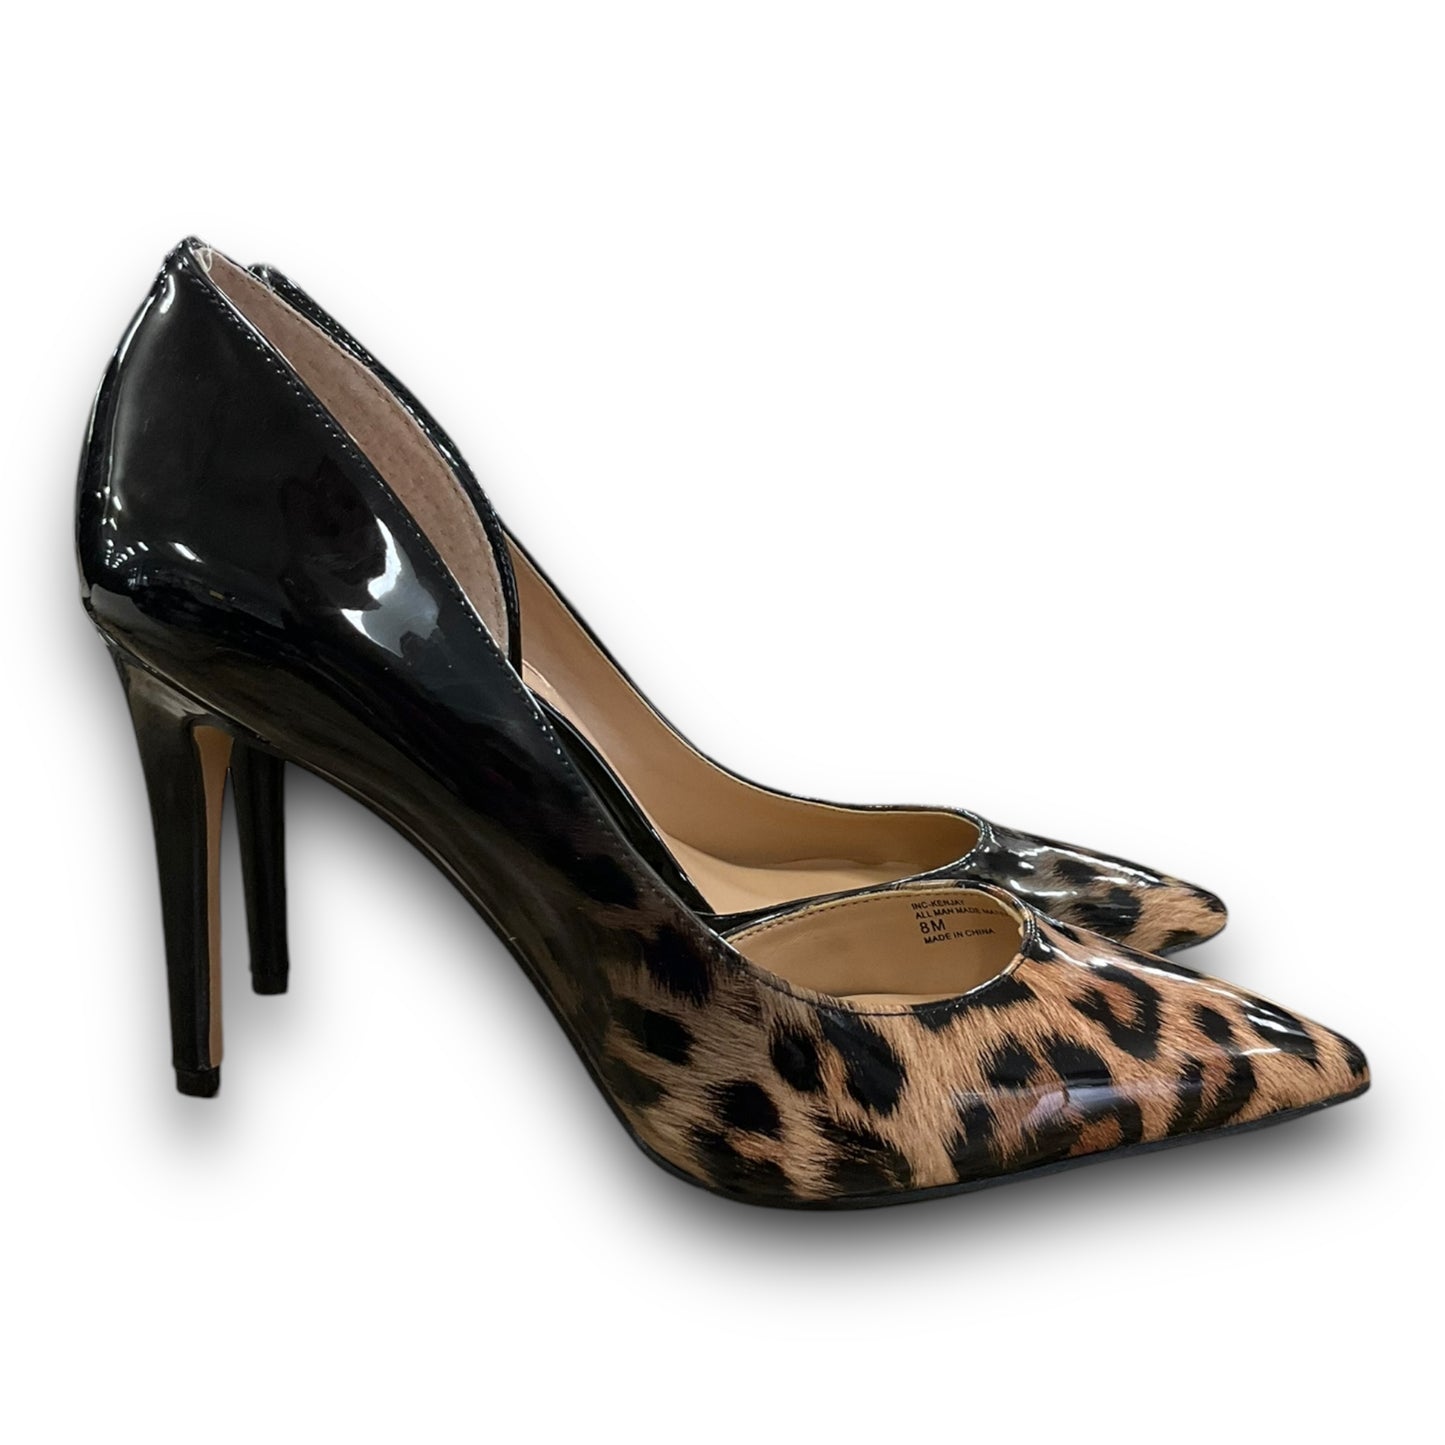 Shoes Heels Stiletto By Inc  Size: 8